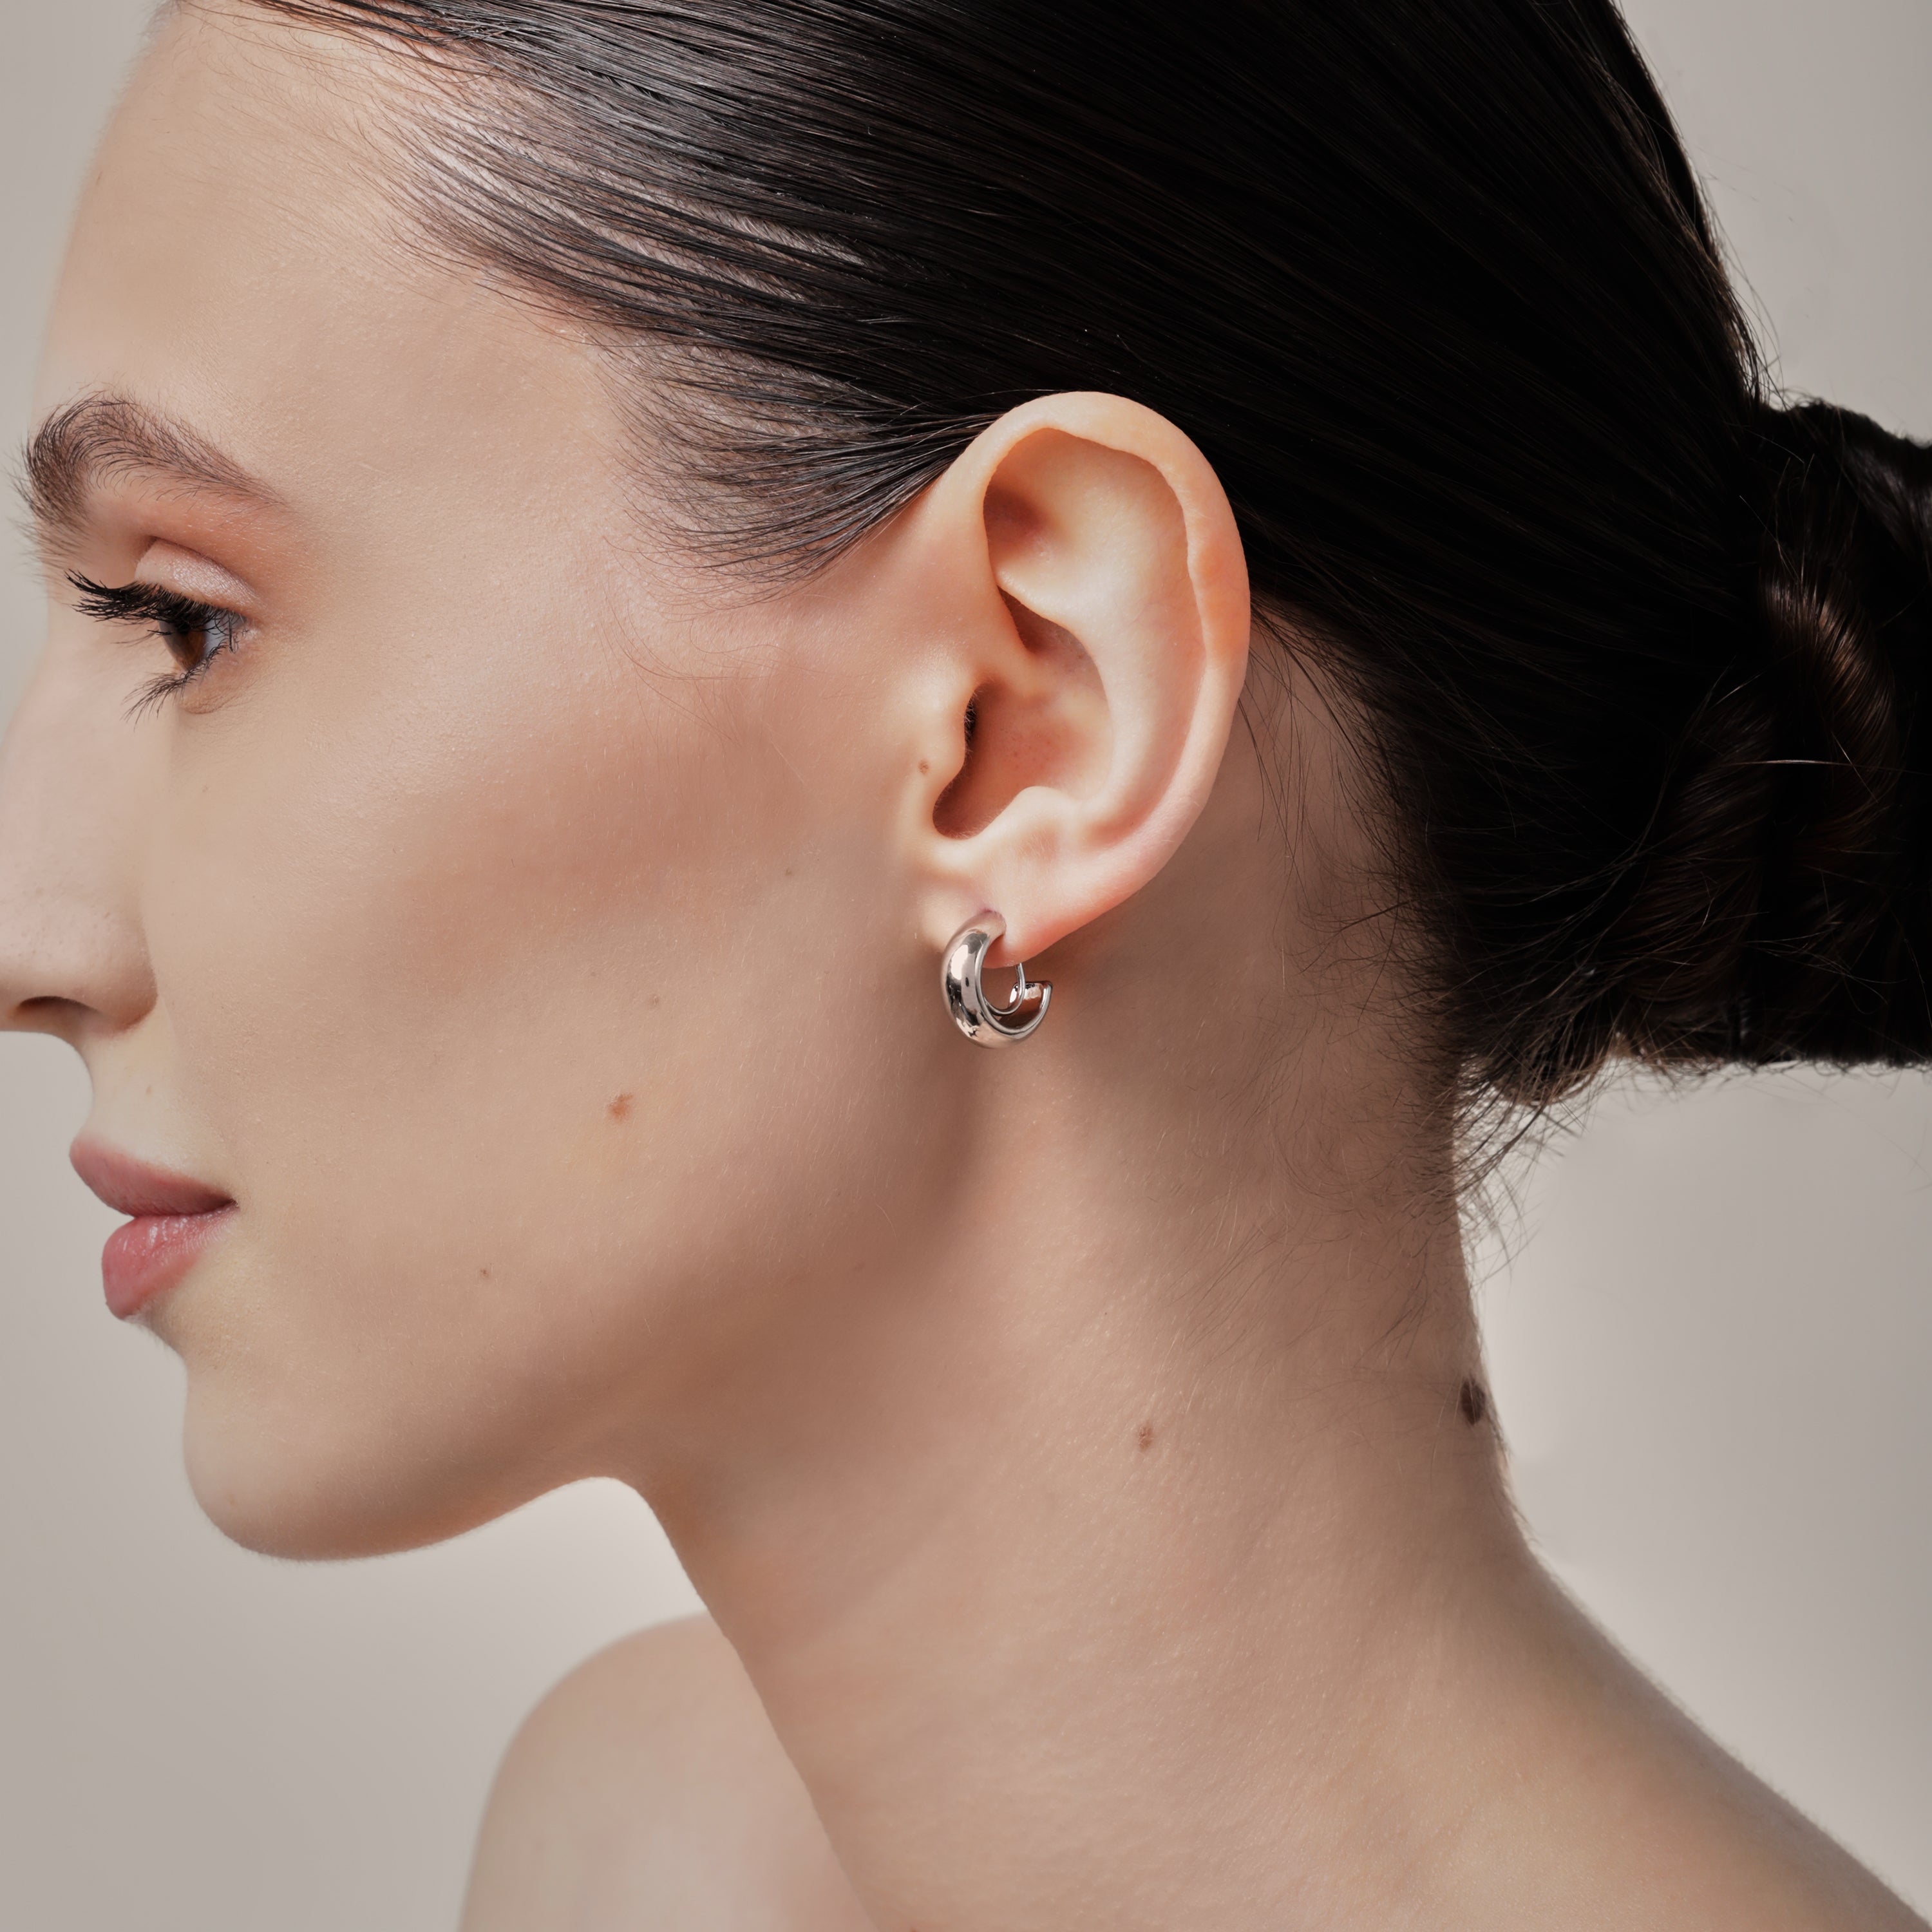 A model wearing the Simple Silver Huggie Clip-On Earrings provide a medium secure hold, making them perfect for all ear types. With adjustable padding for extra comfort, these earrings can be worn for up to 24 hours with ease. Crafted from copper alloy, they are also available in a gold finish.